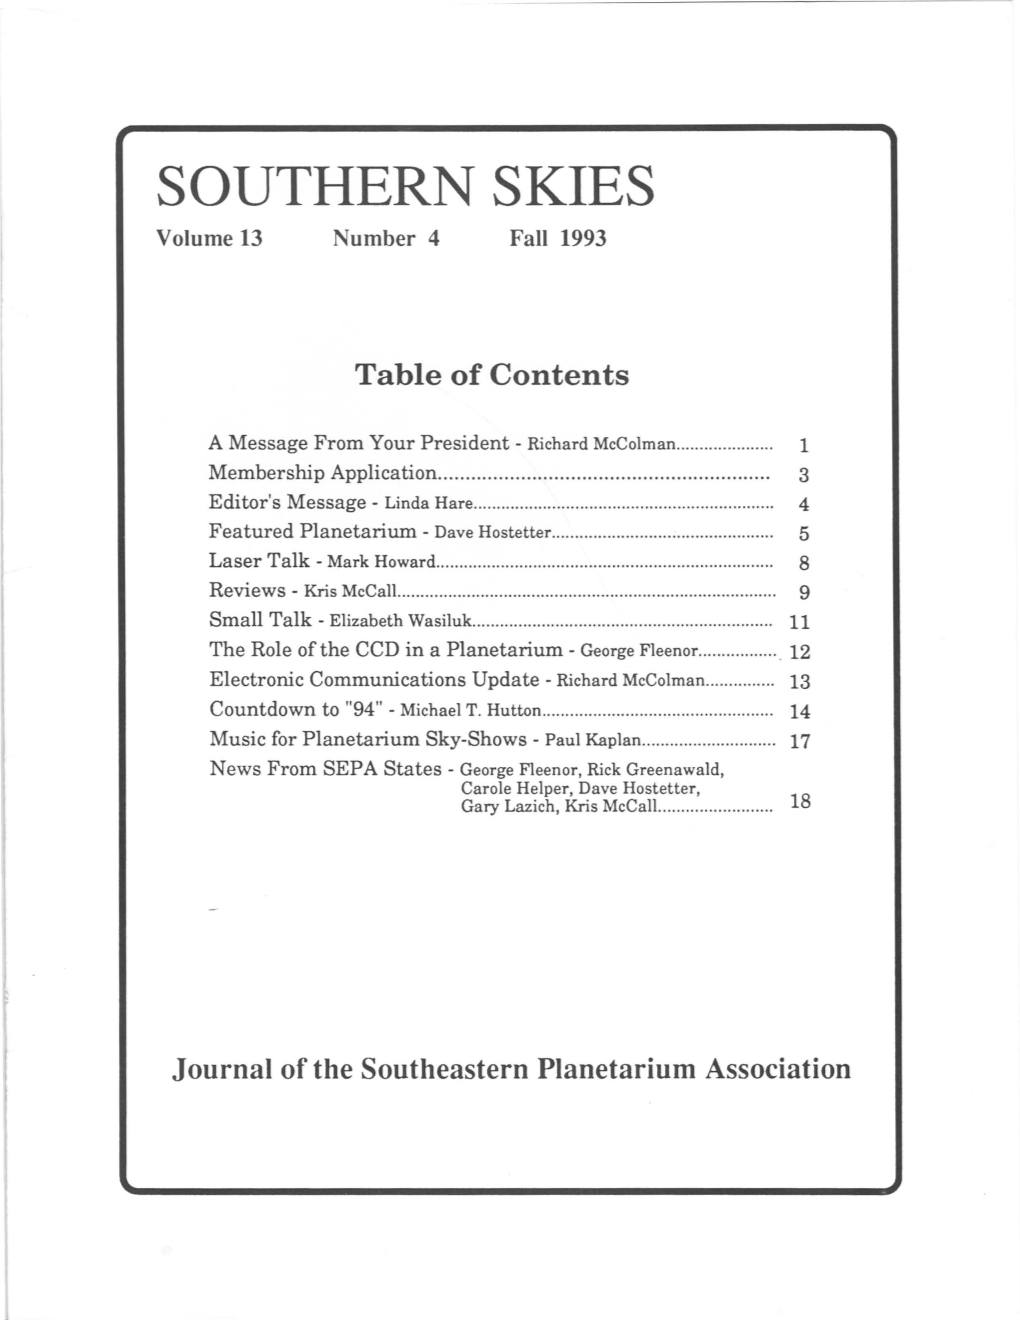 SOUTHERN SKIES Volume 13 Number 4 Fall 1993